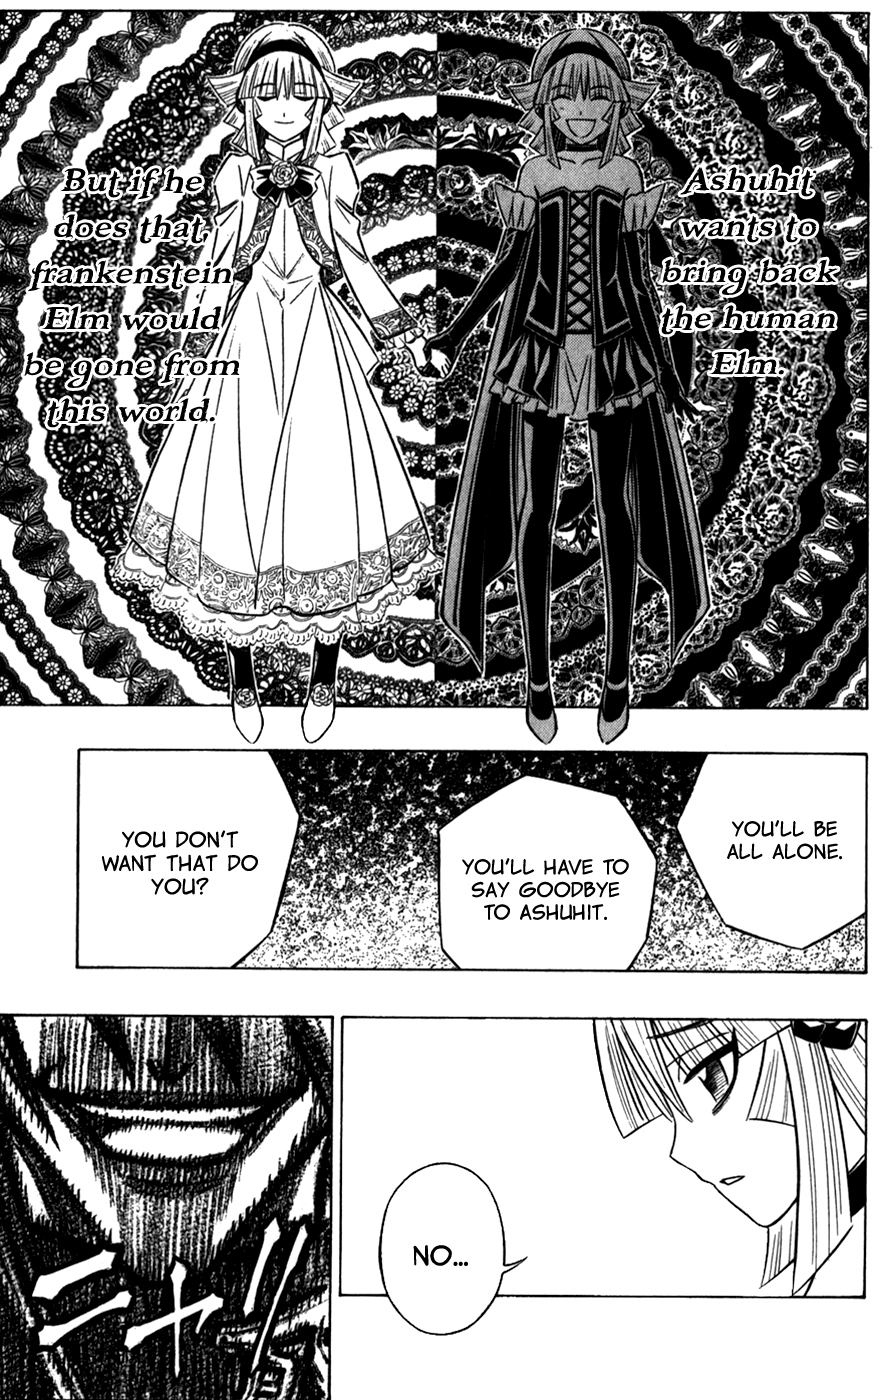 Embalming The Another Tale of Frankenstein Vol. 7 Ch. 39